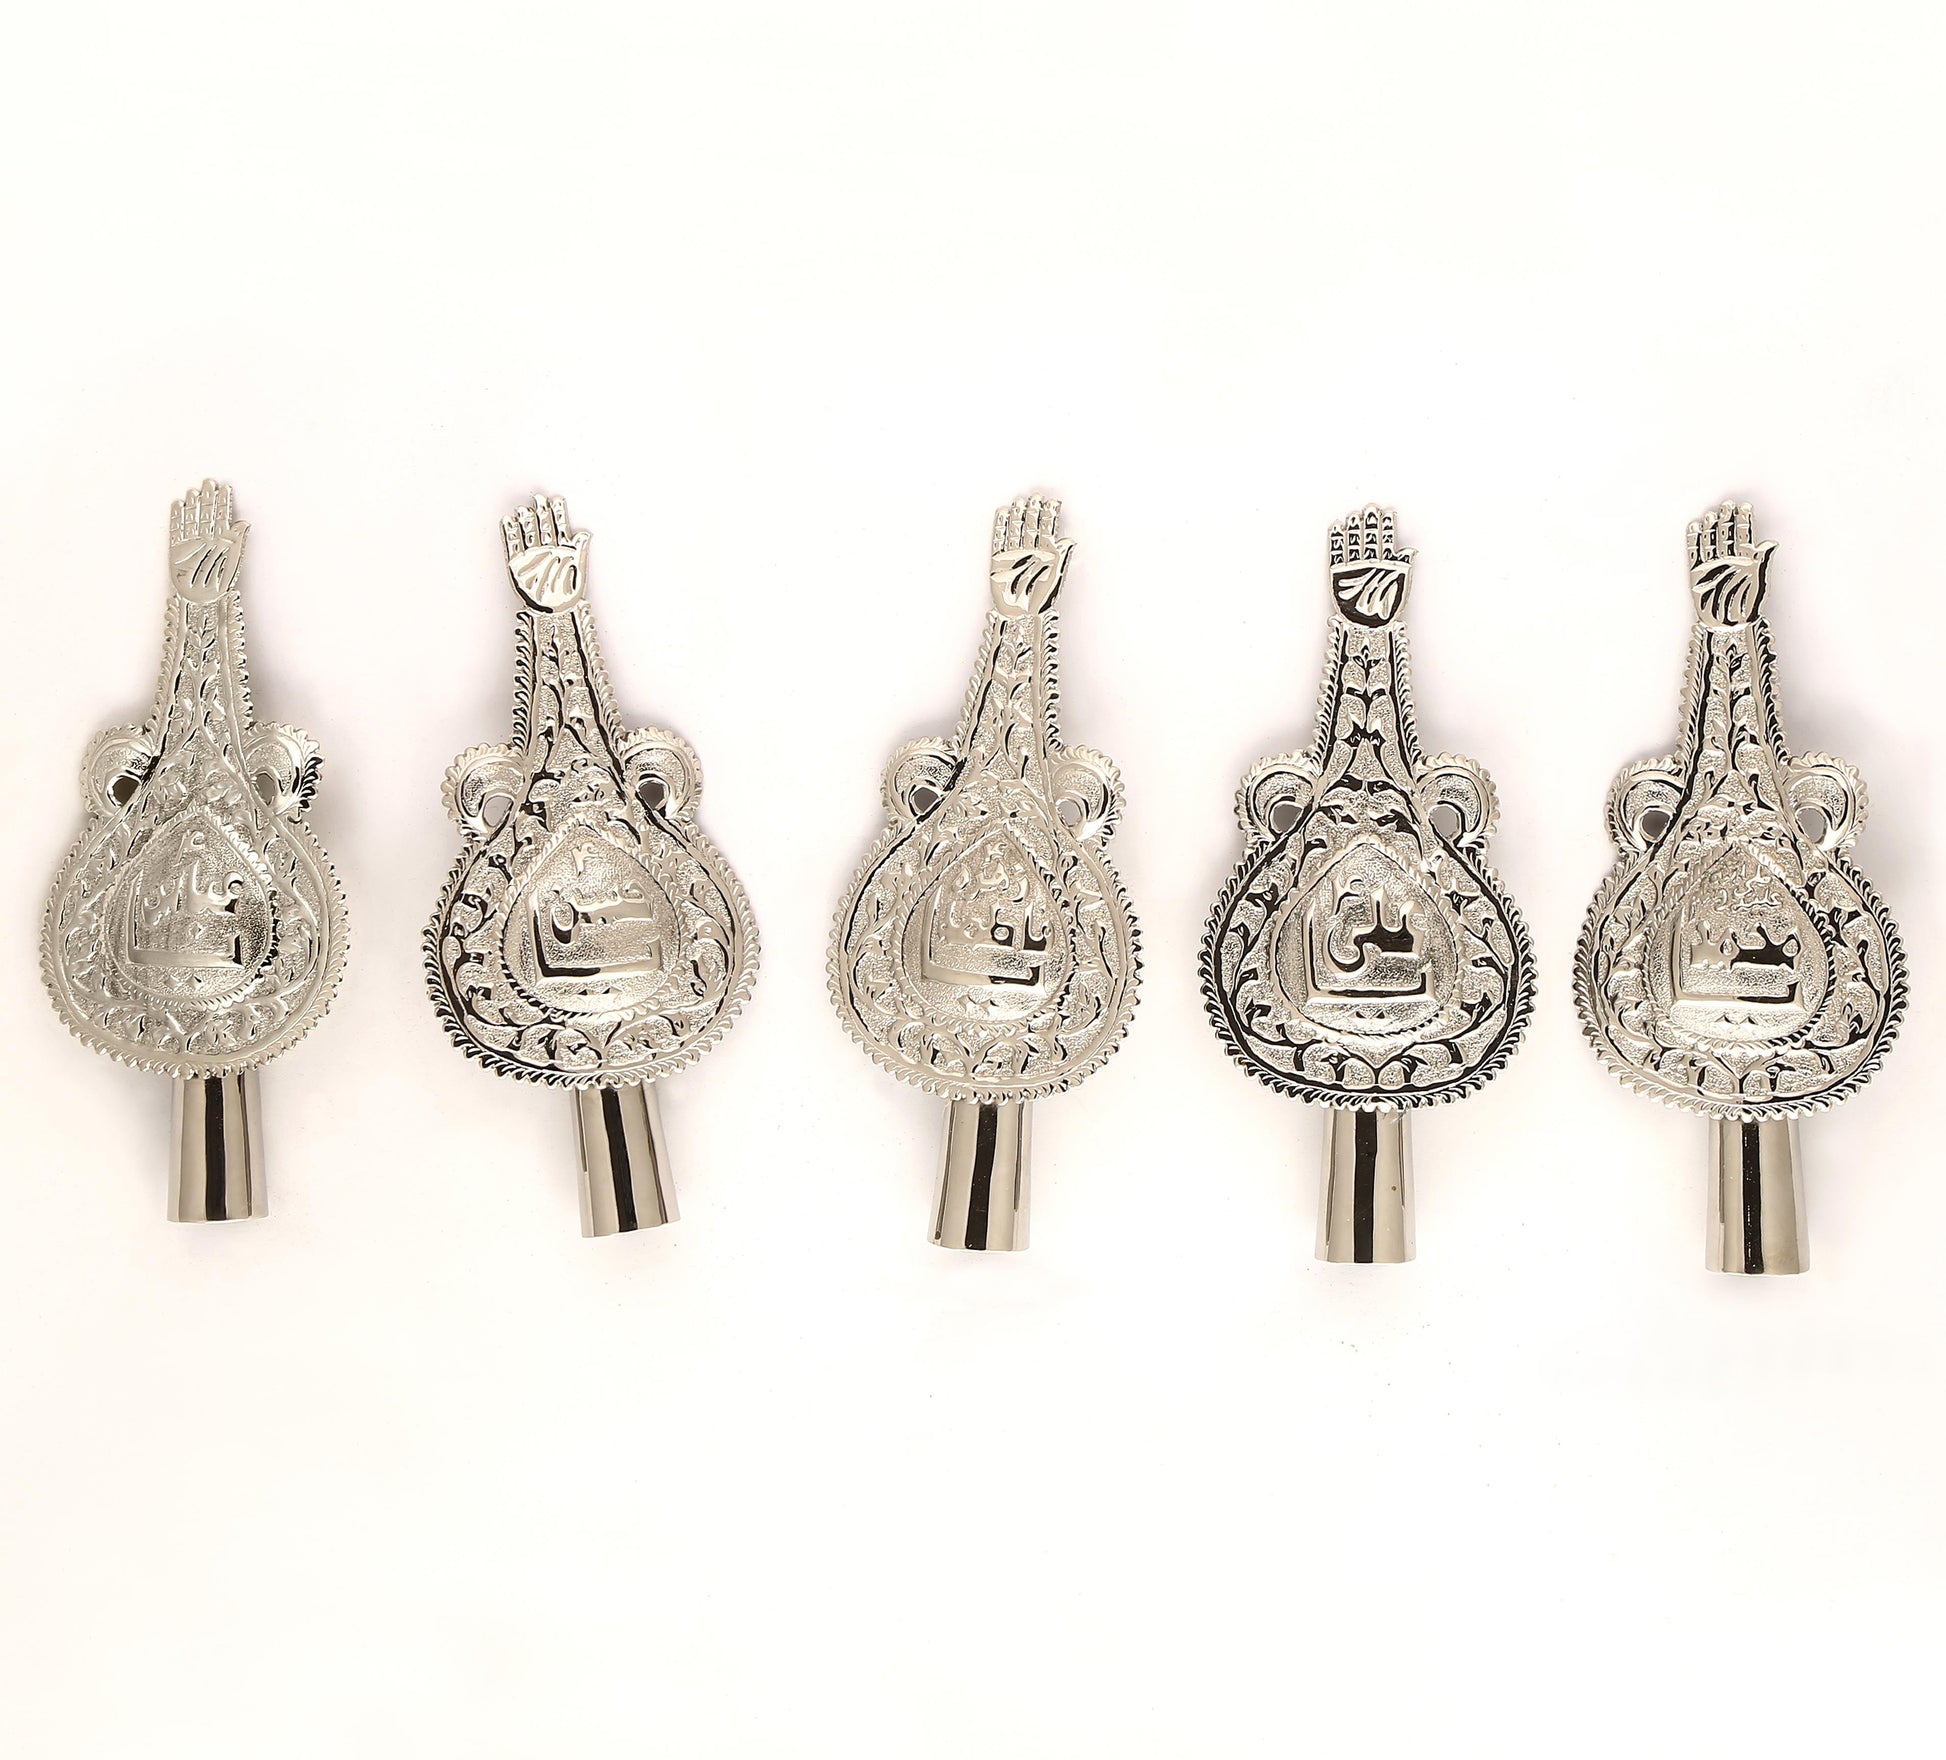 Enhance Your Home Azakhana with the Exquisite Punjatan (as) Silver Crafting Panja